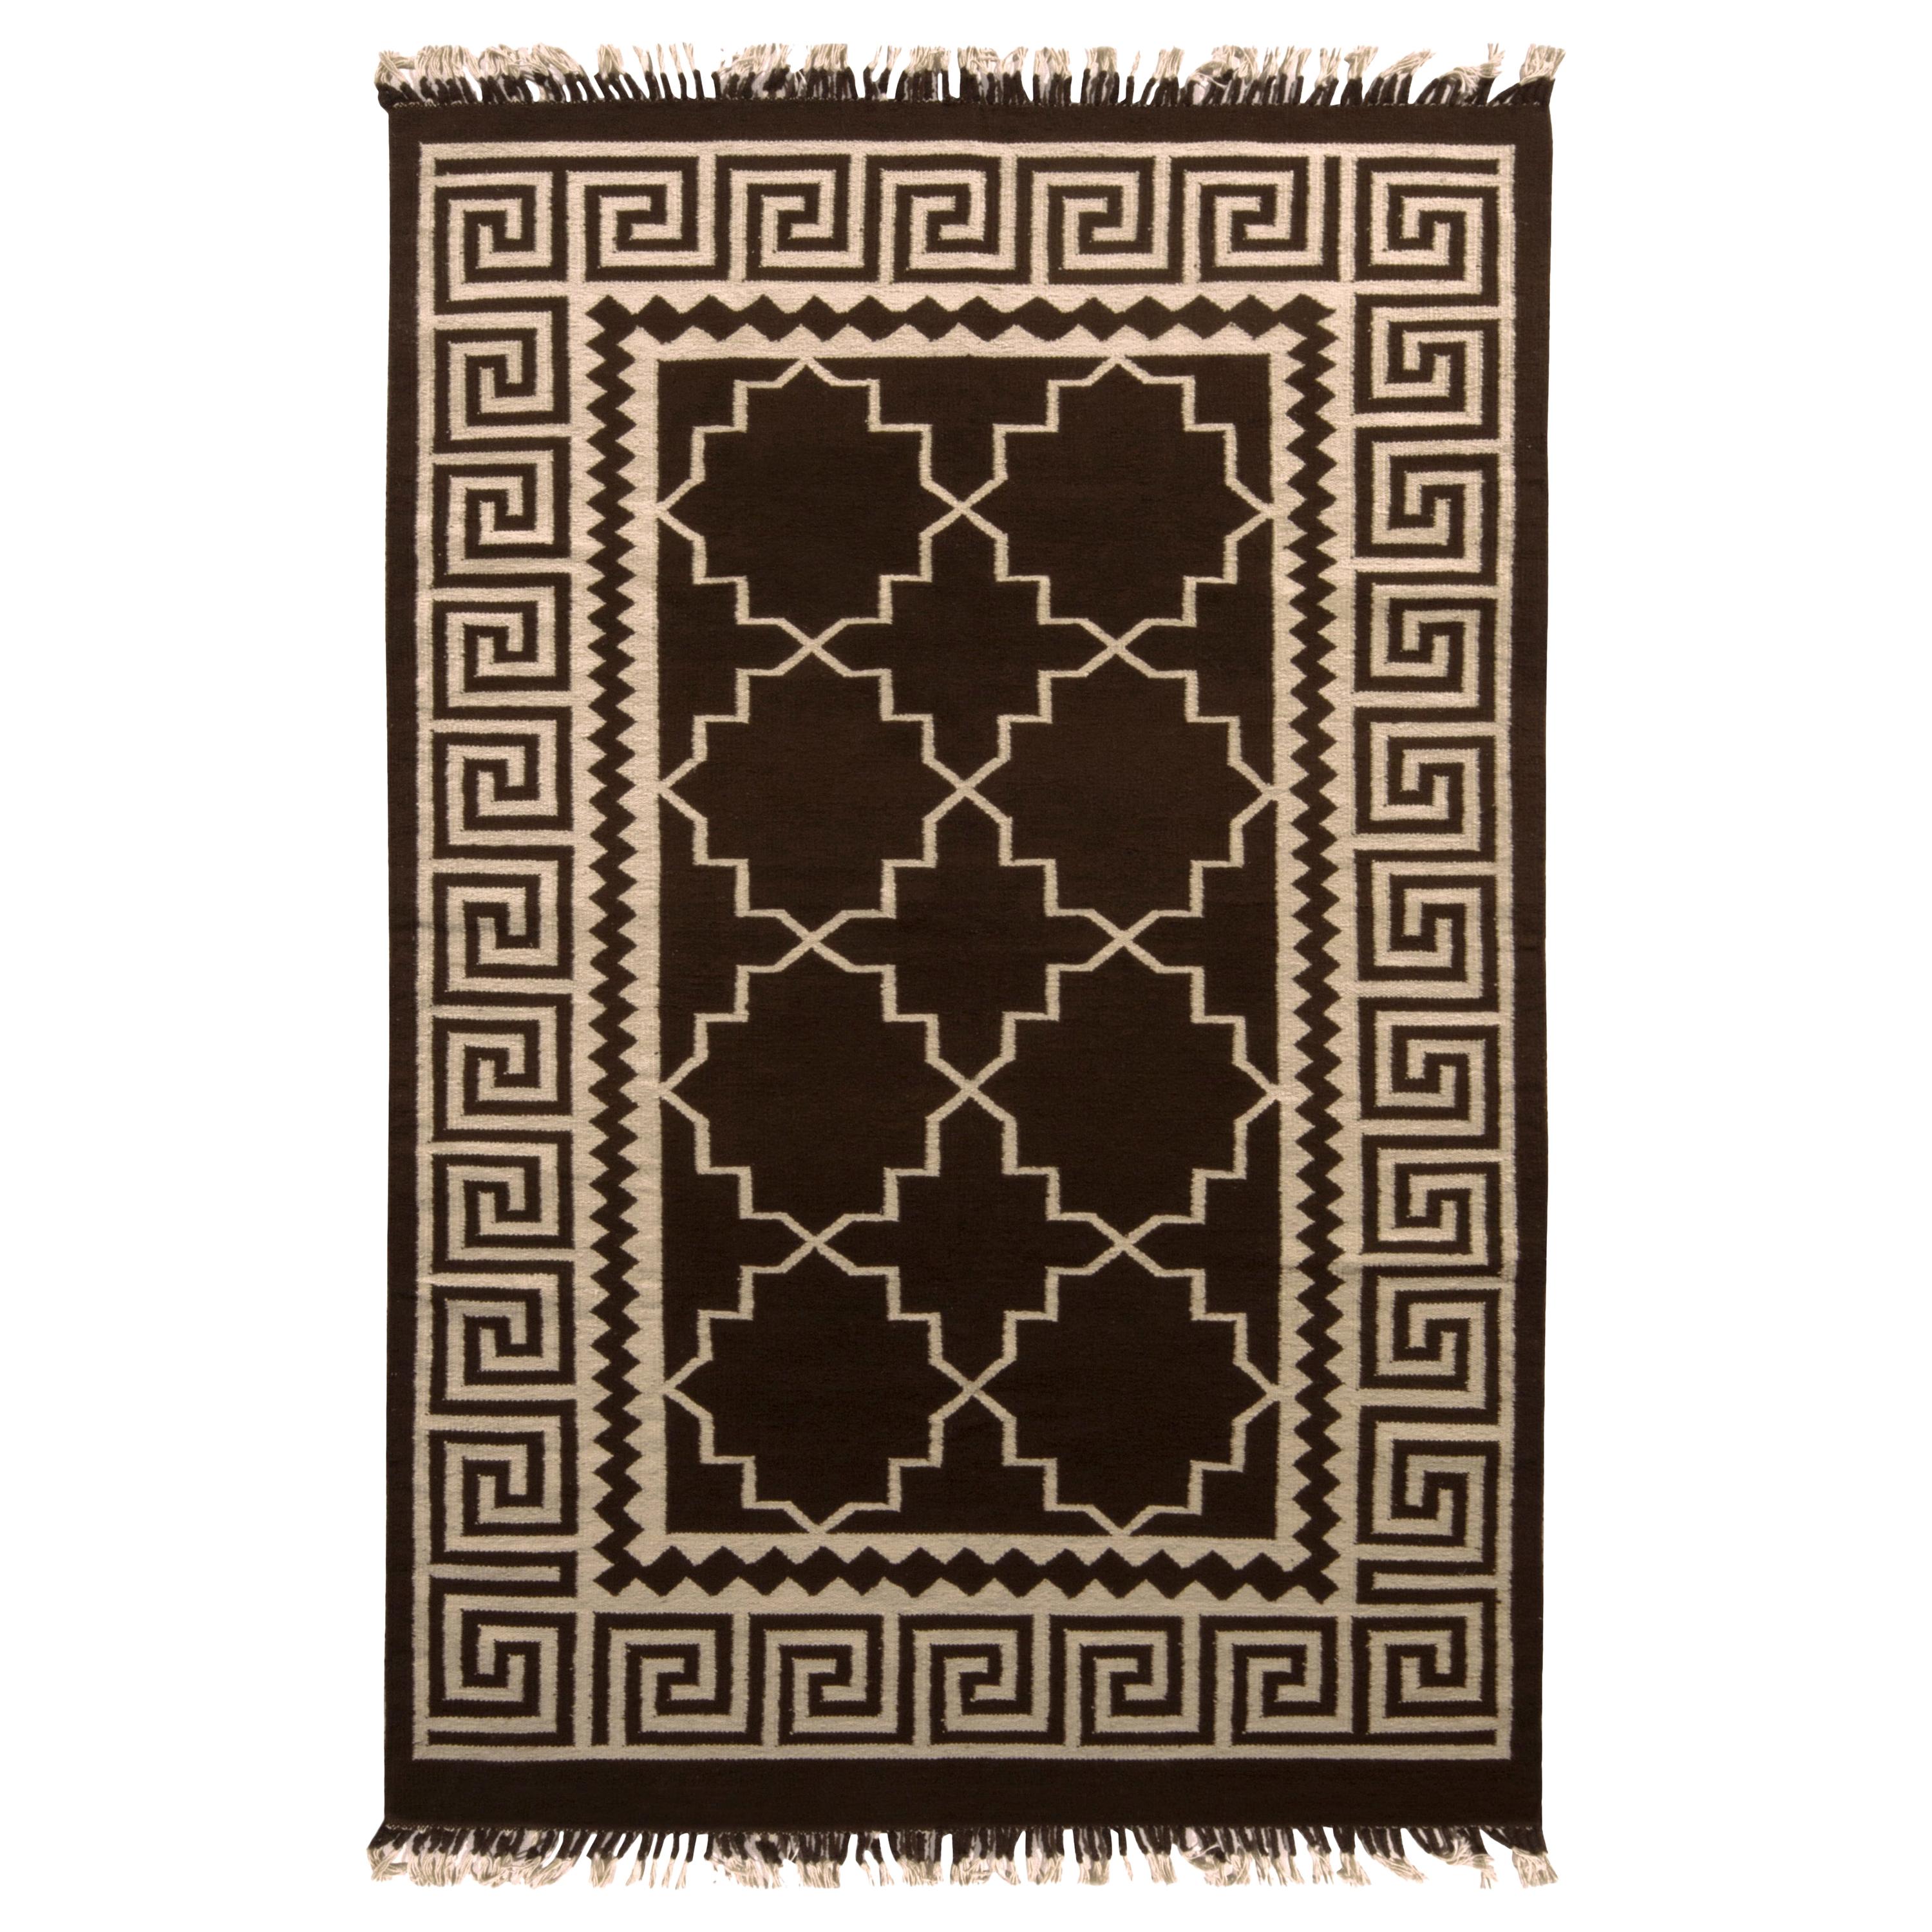 Beige Transitional Kilim Rug At 1stdibs, Contemporary Flat Weave Rugs